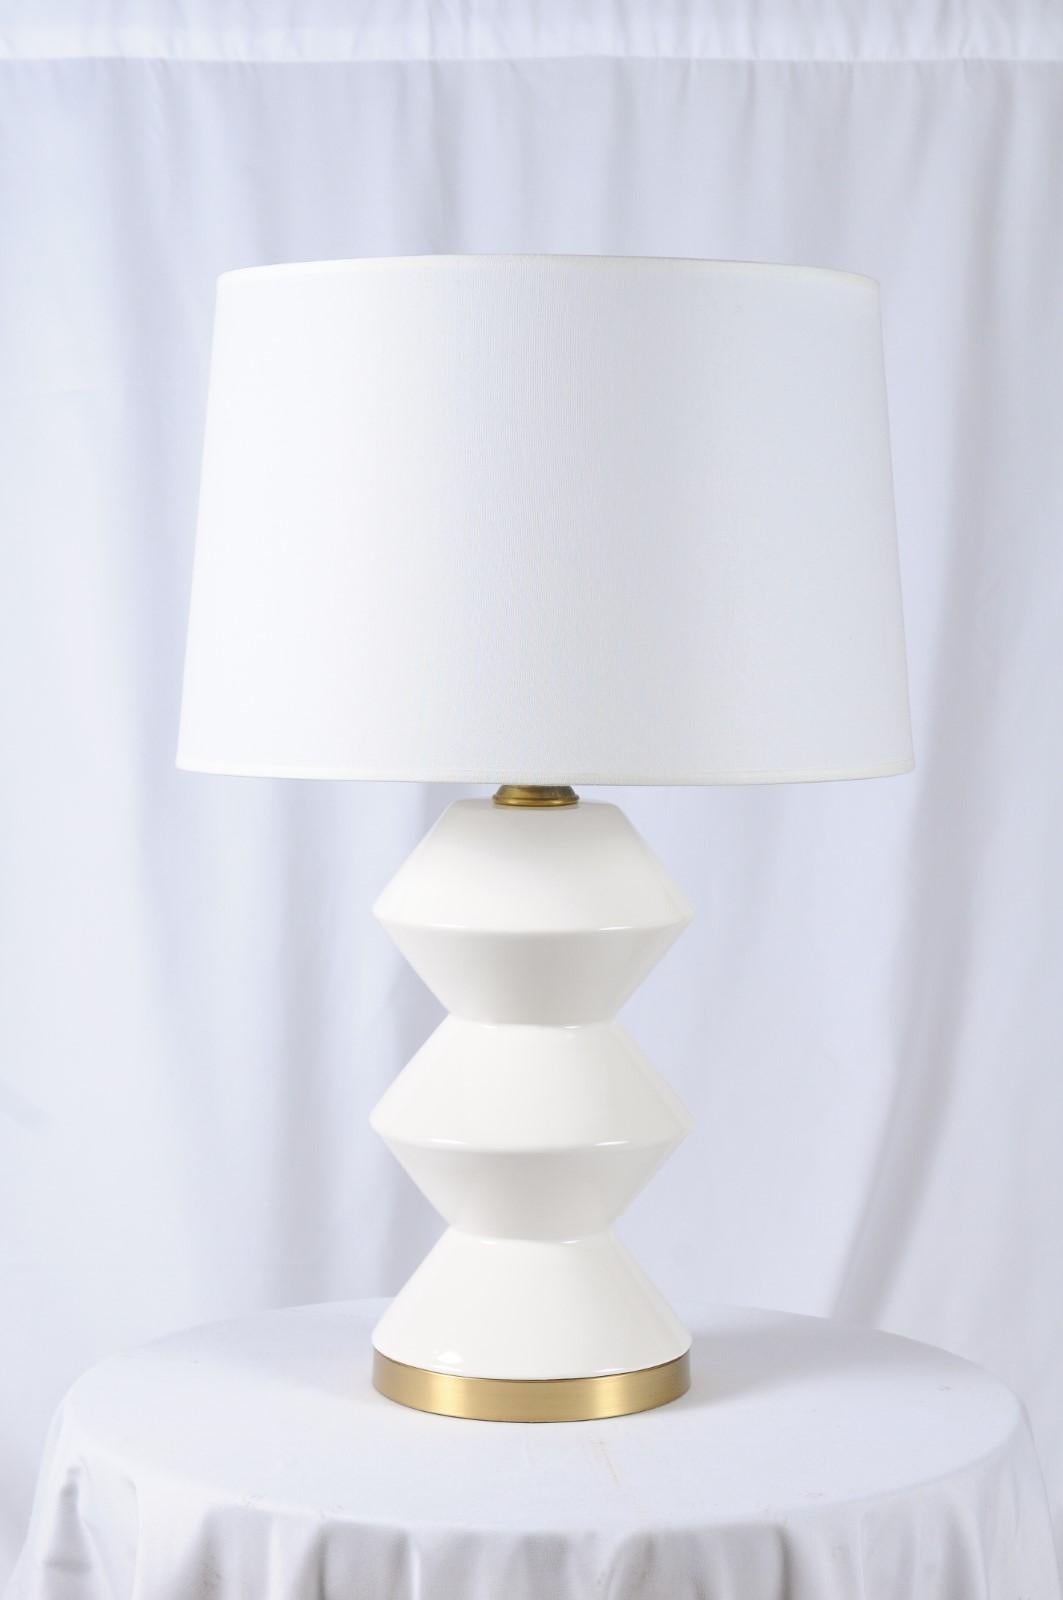 Derby table lamp. White ceramic with a gloss finish and a solid unlacquered hand-rubbed antique brass base with brass socket with upgraded switch turn key. Made in the USA by Fox Mill Lighting & Supply, and a 60 watt bulb recommended.
Measures: 28